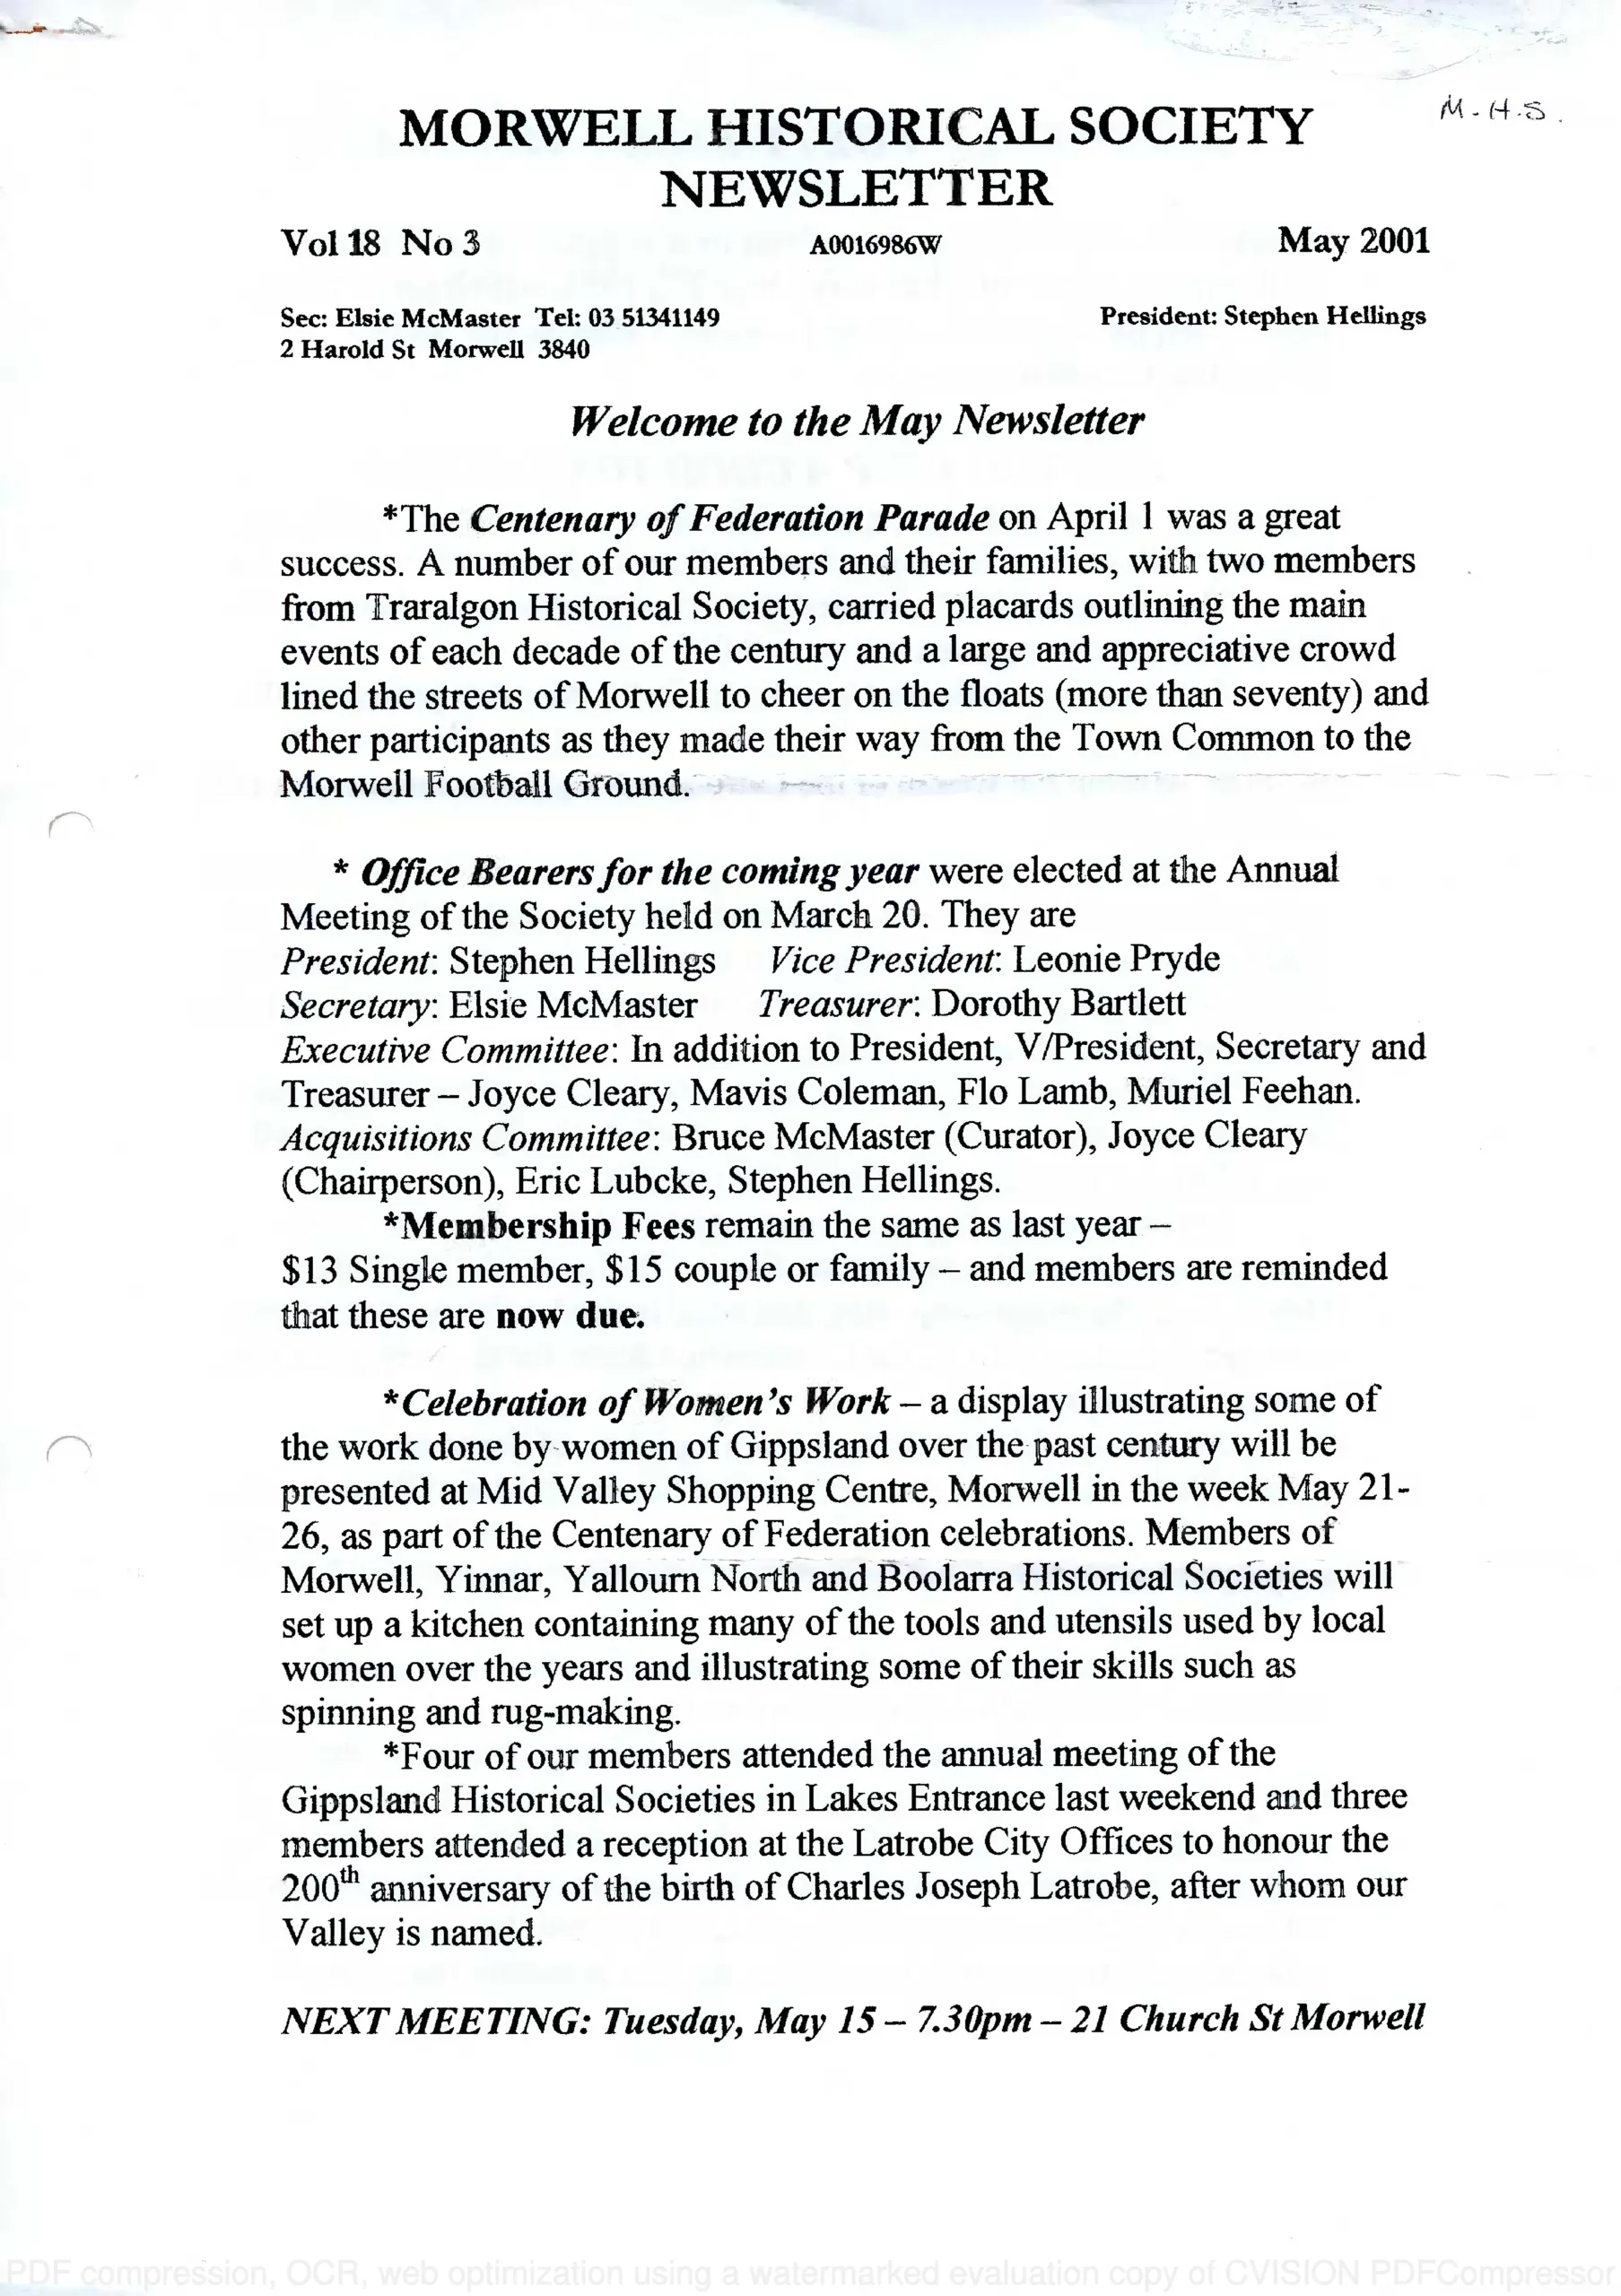 Newsletter May 2001